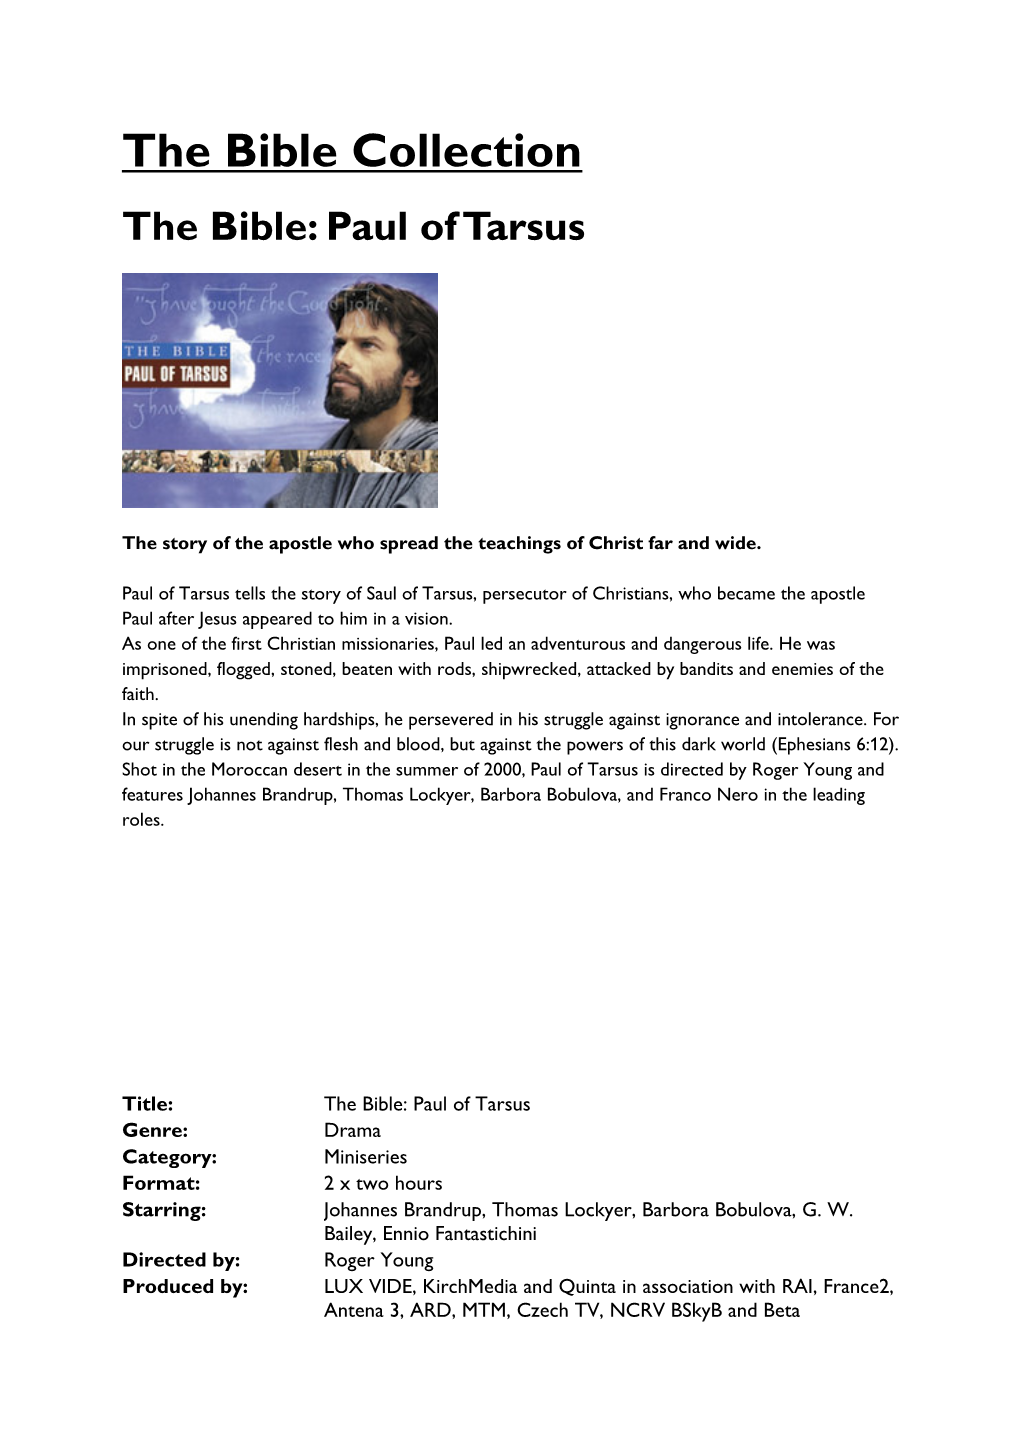 The Bible Collection the Bible: Paul of Tarsus